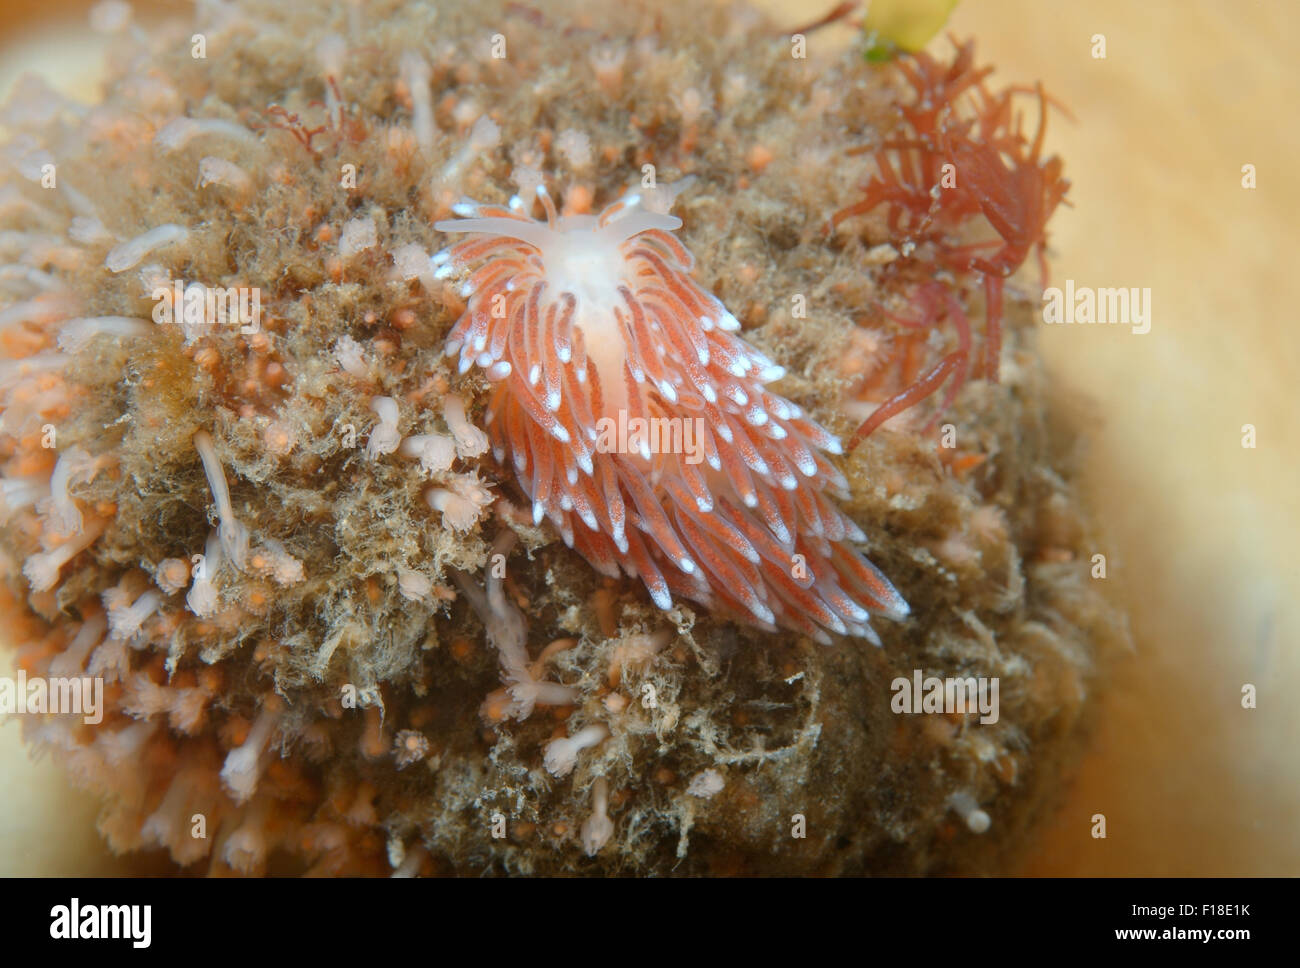 Oct. 15, 2014 - Sea Of Japan, Primorye, Far East, Russia - Nudibranch or Sea Slug  (Cuthona nana ), This kind of nudibranchs - found only in hermit crabs ( Pagurus sp. ). Sea of Japan, Rudnaya Pristan, Far East, Primorsky Krai, Russia (Credit Image: © Andrey Nekrasov/ZUMA Wire/ZUMAPRESS.com) Stock Photo